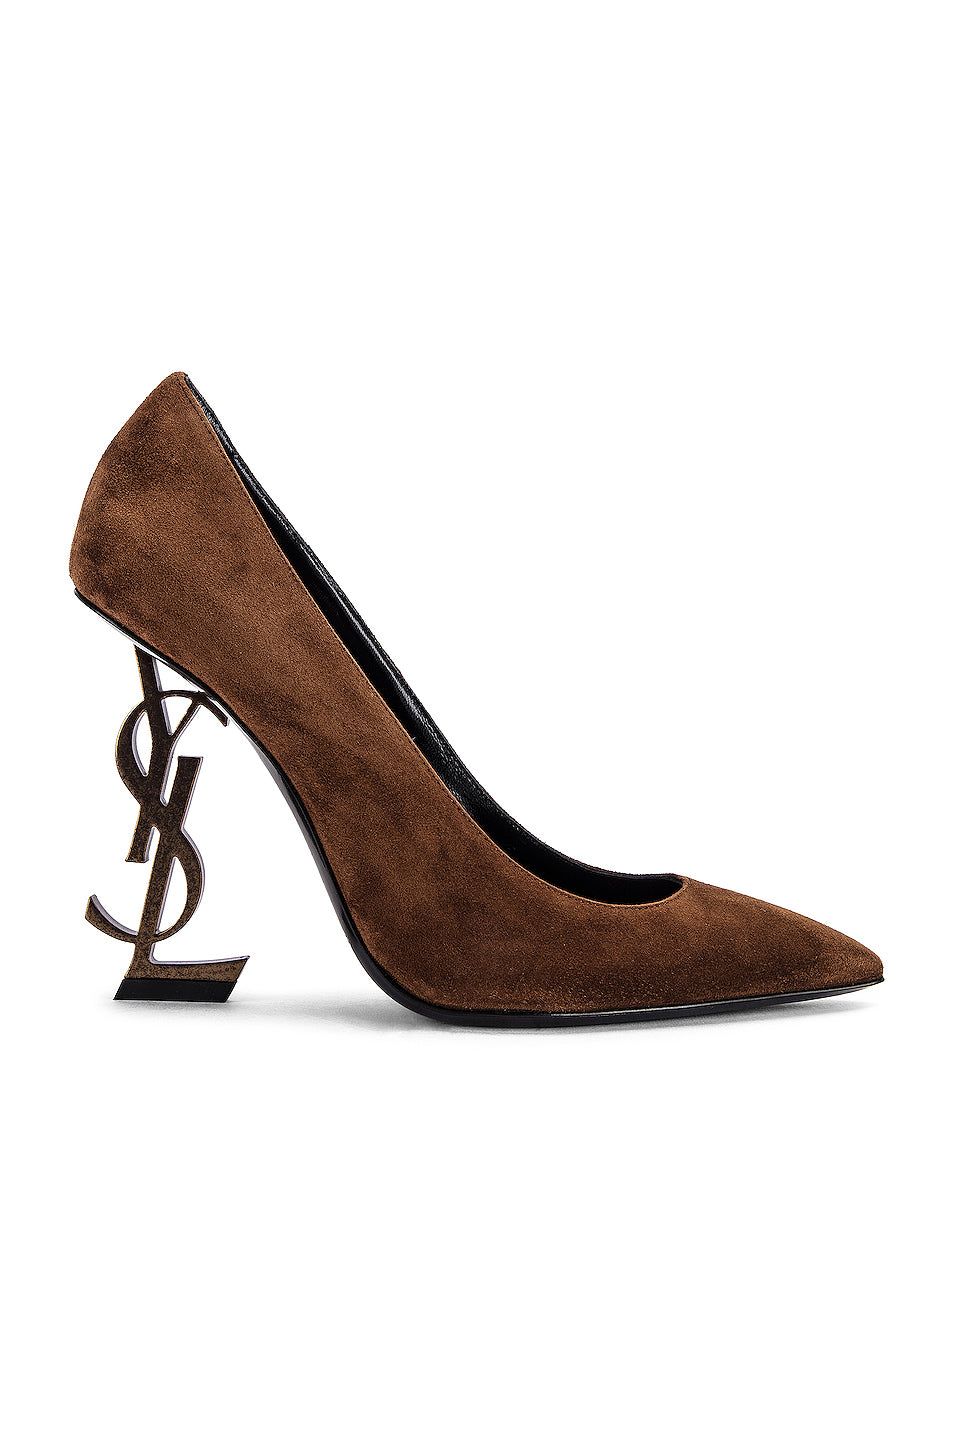 SAINT LAURENT Elegant Land Pumps for Women from the SS20 Collection